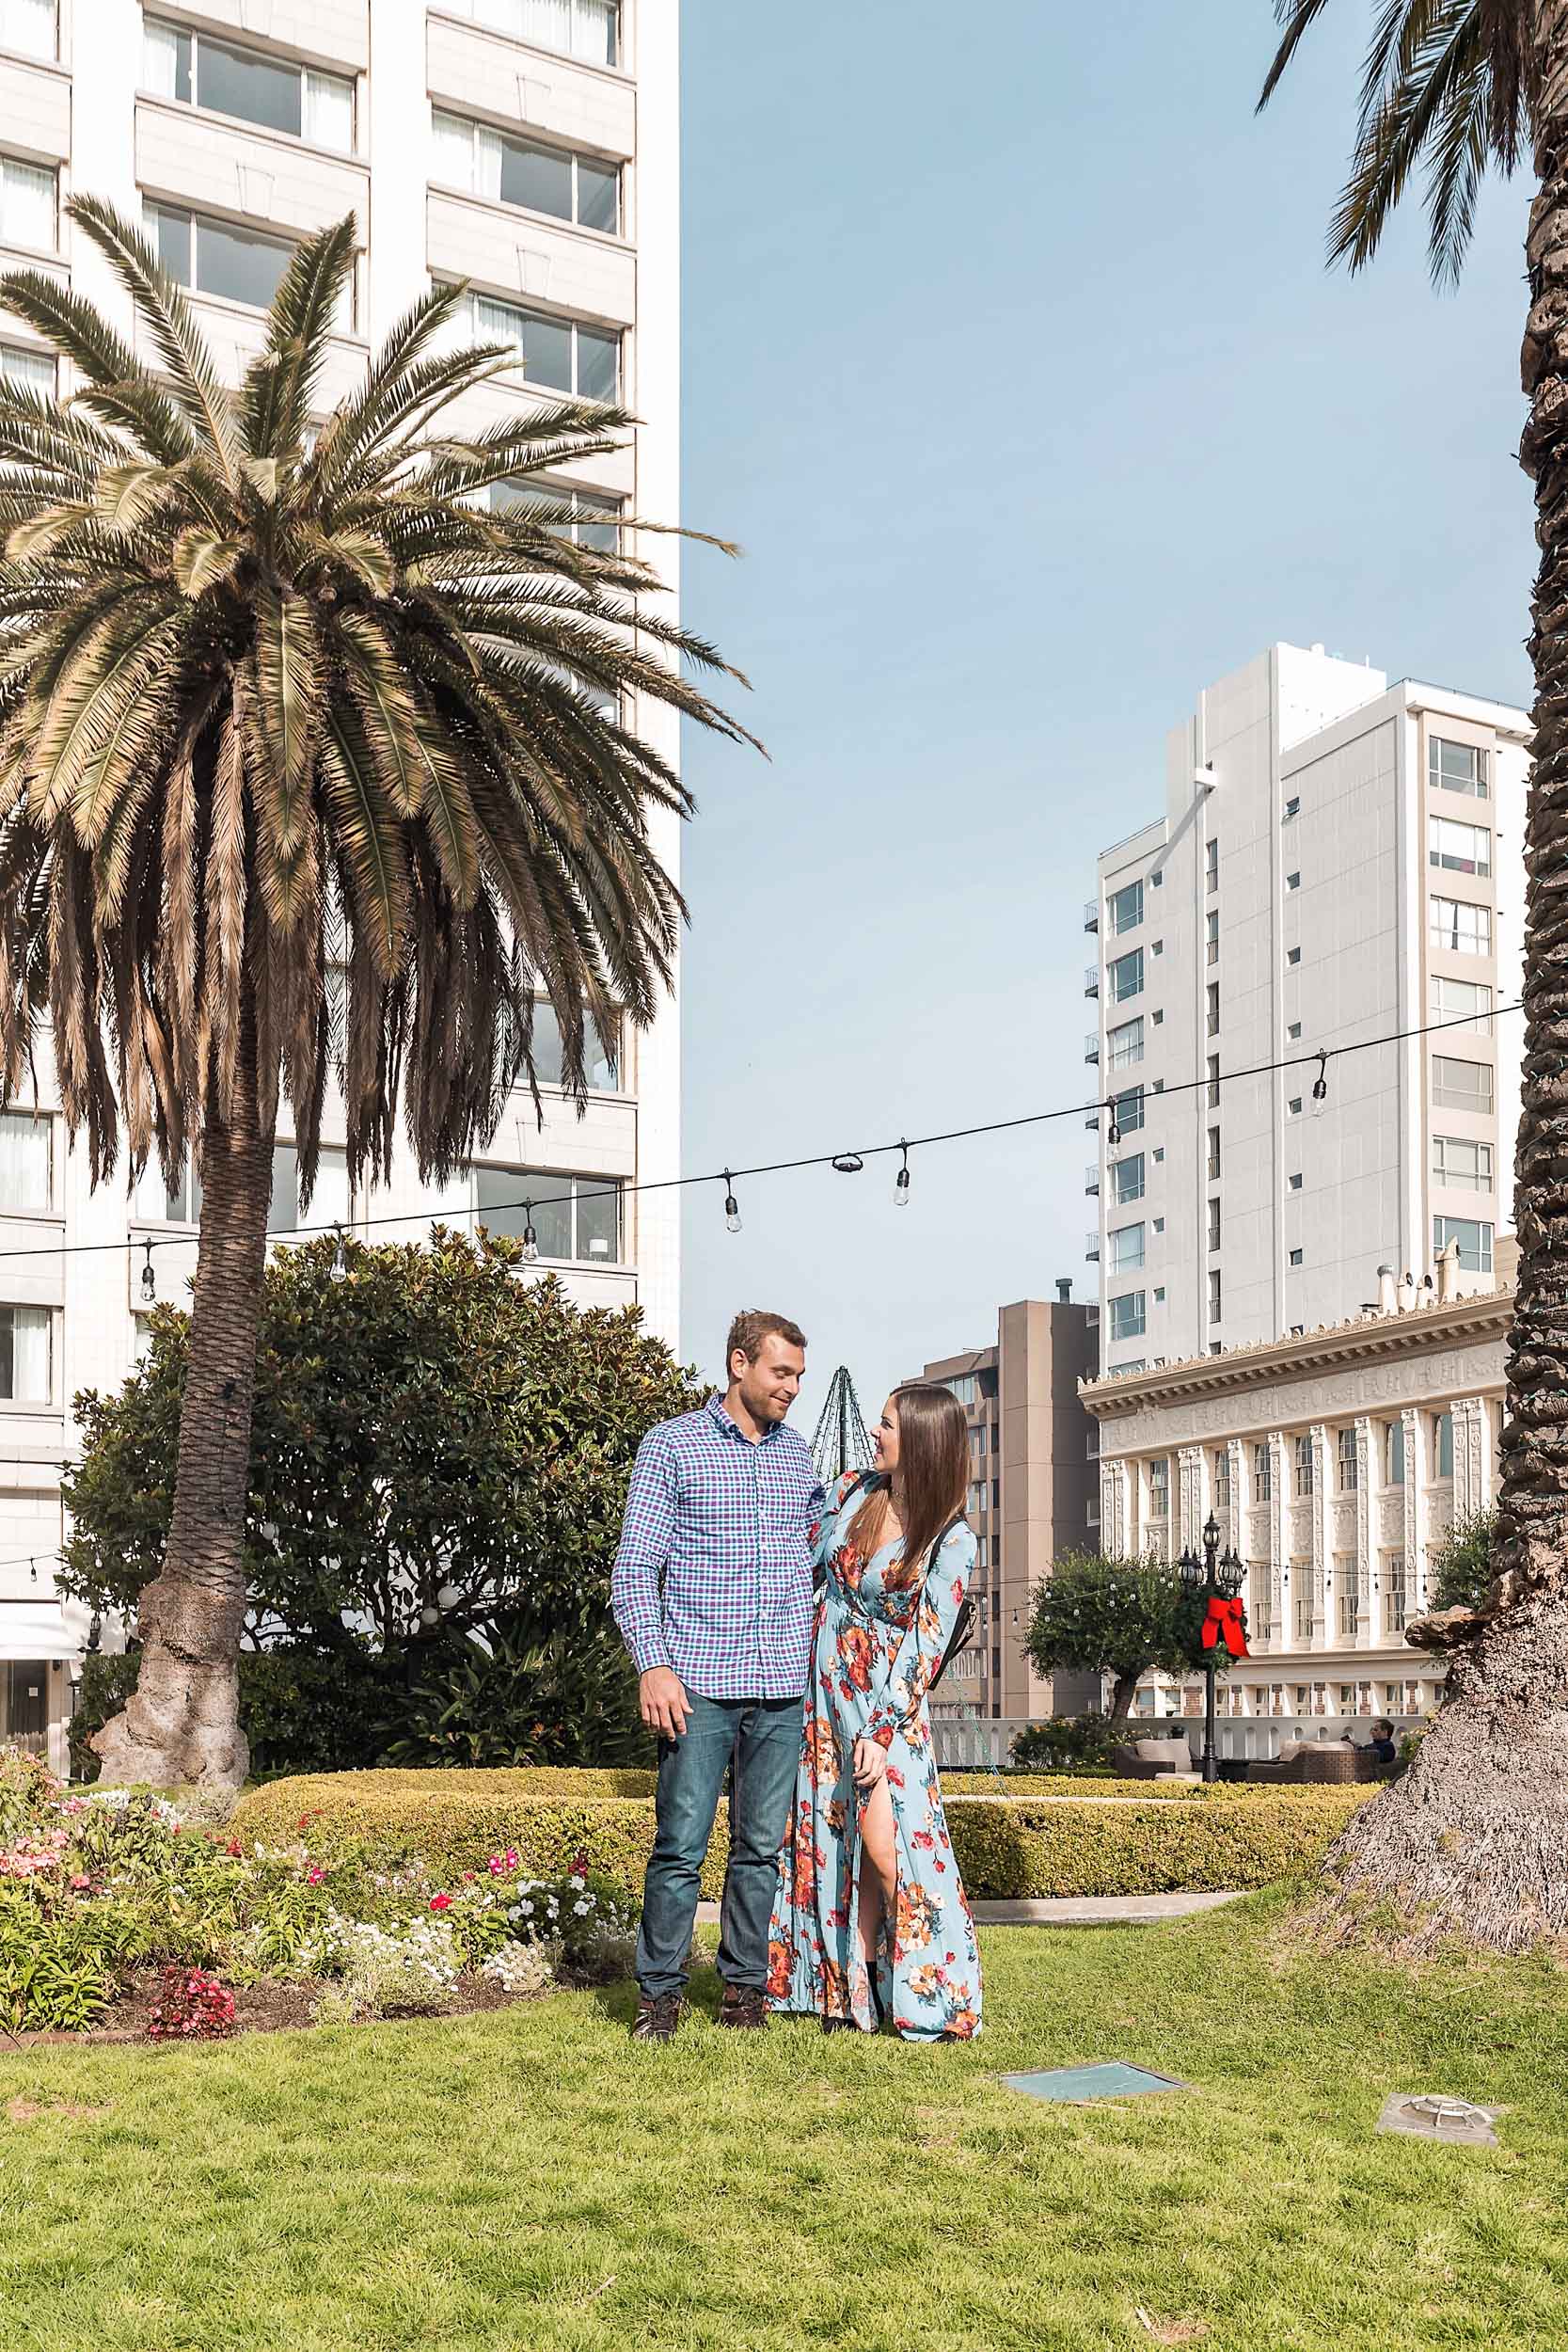 The rooftop garden on top of The Fairmont San Francisco offers beautiful skyline city views and is a great place to relax in the sunshine below the palm trees